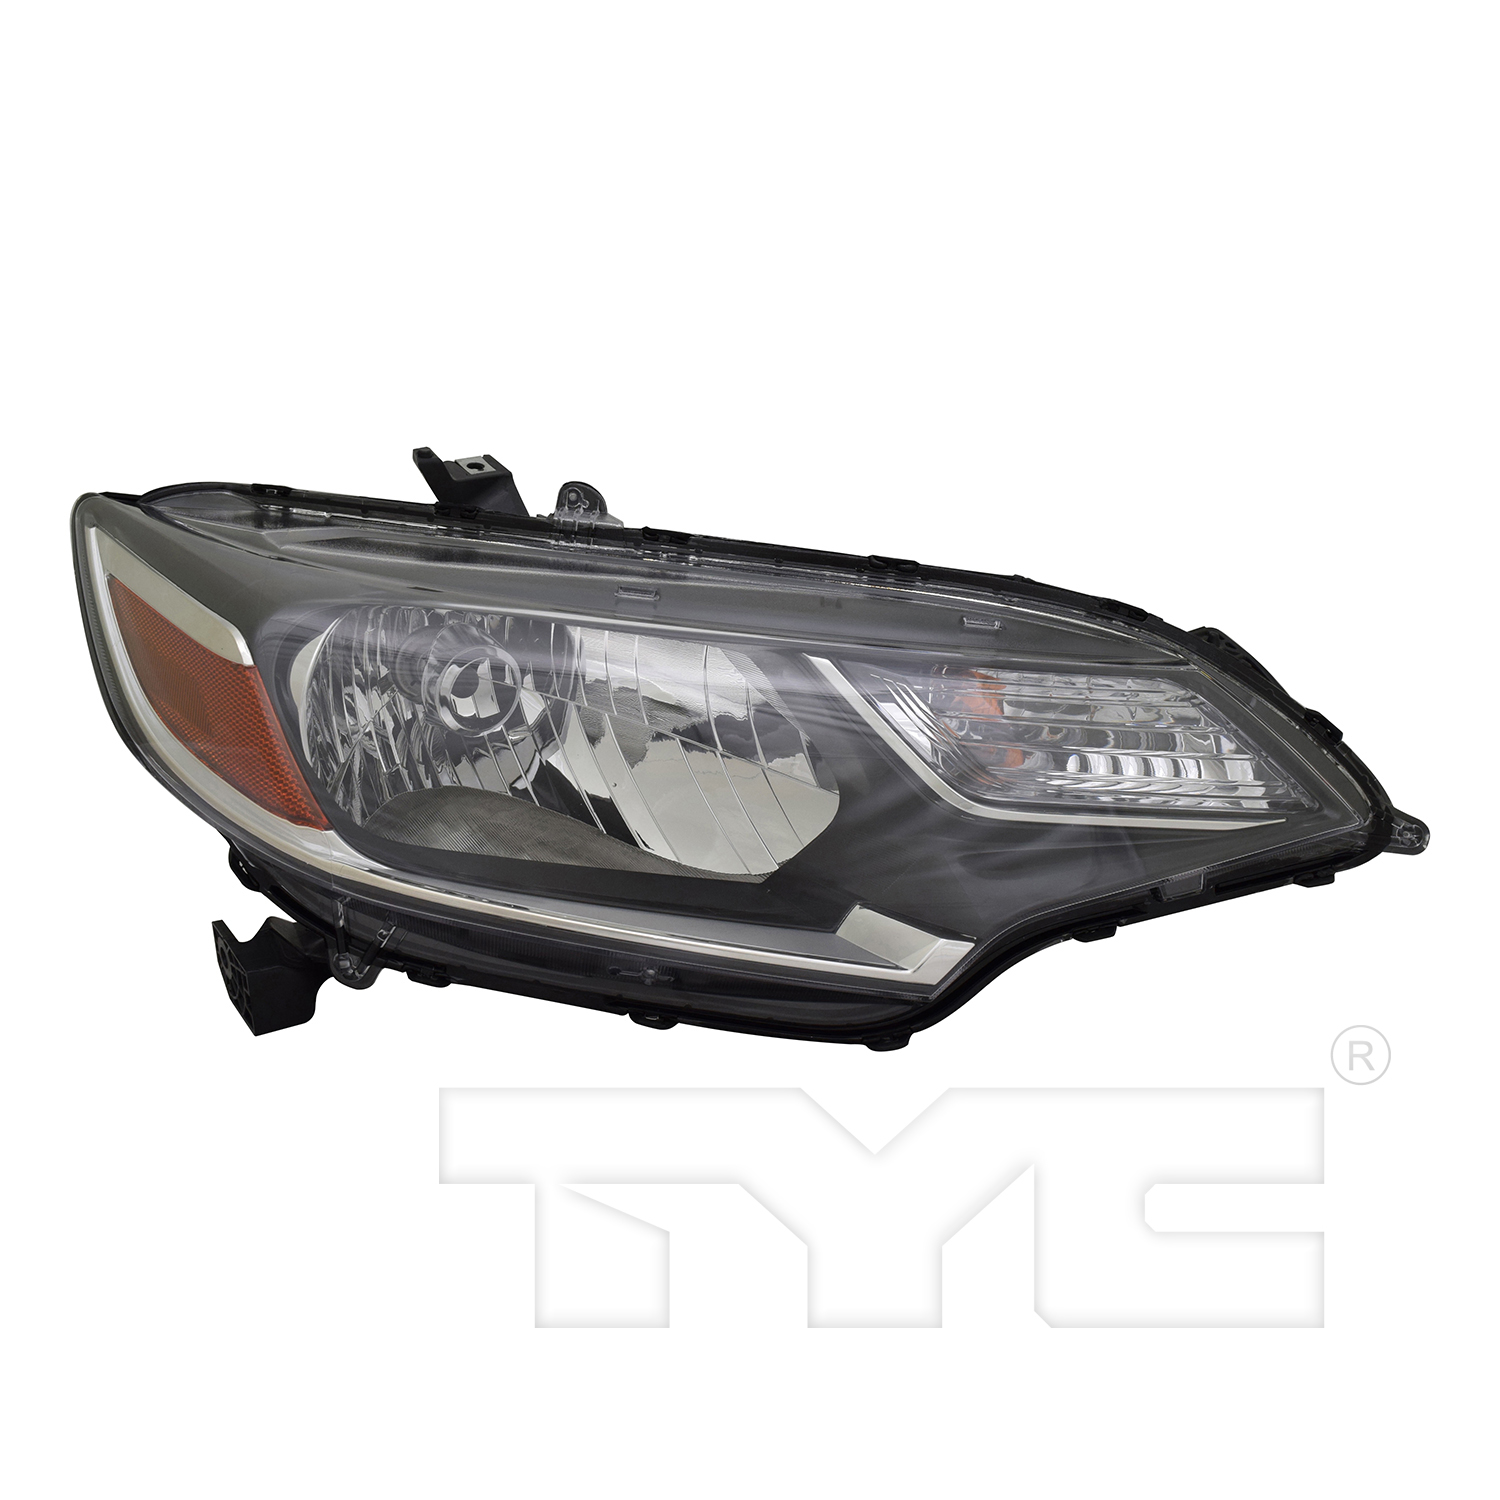 Aftermarket HEADLIGHTS for HONDA - FIT, FIT,18-20,RT Headlamp assy composite